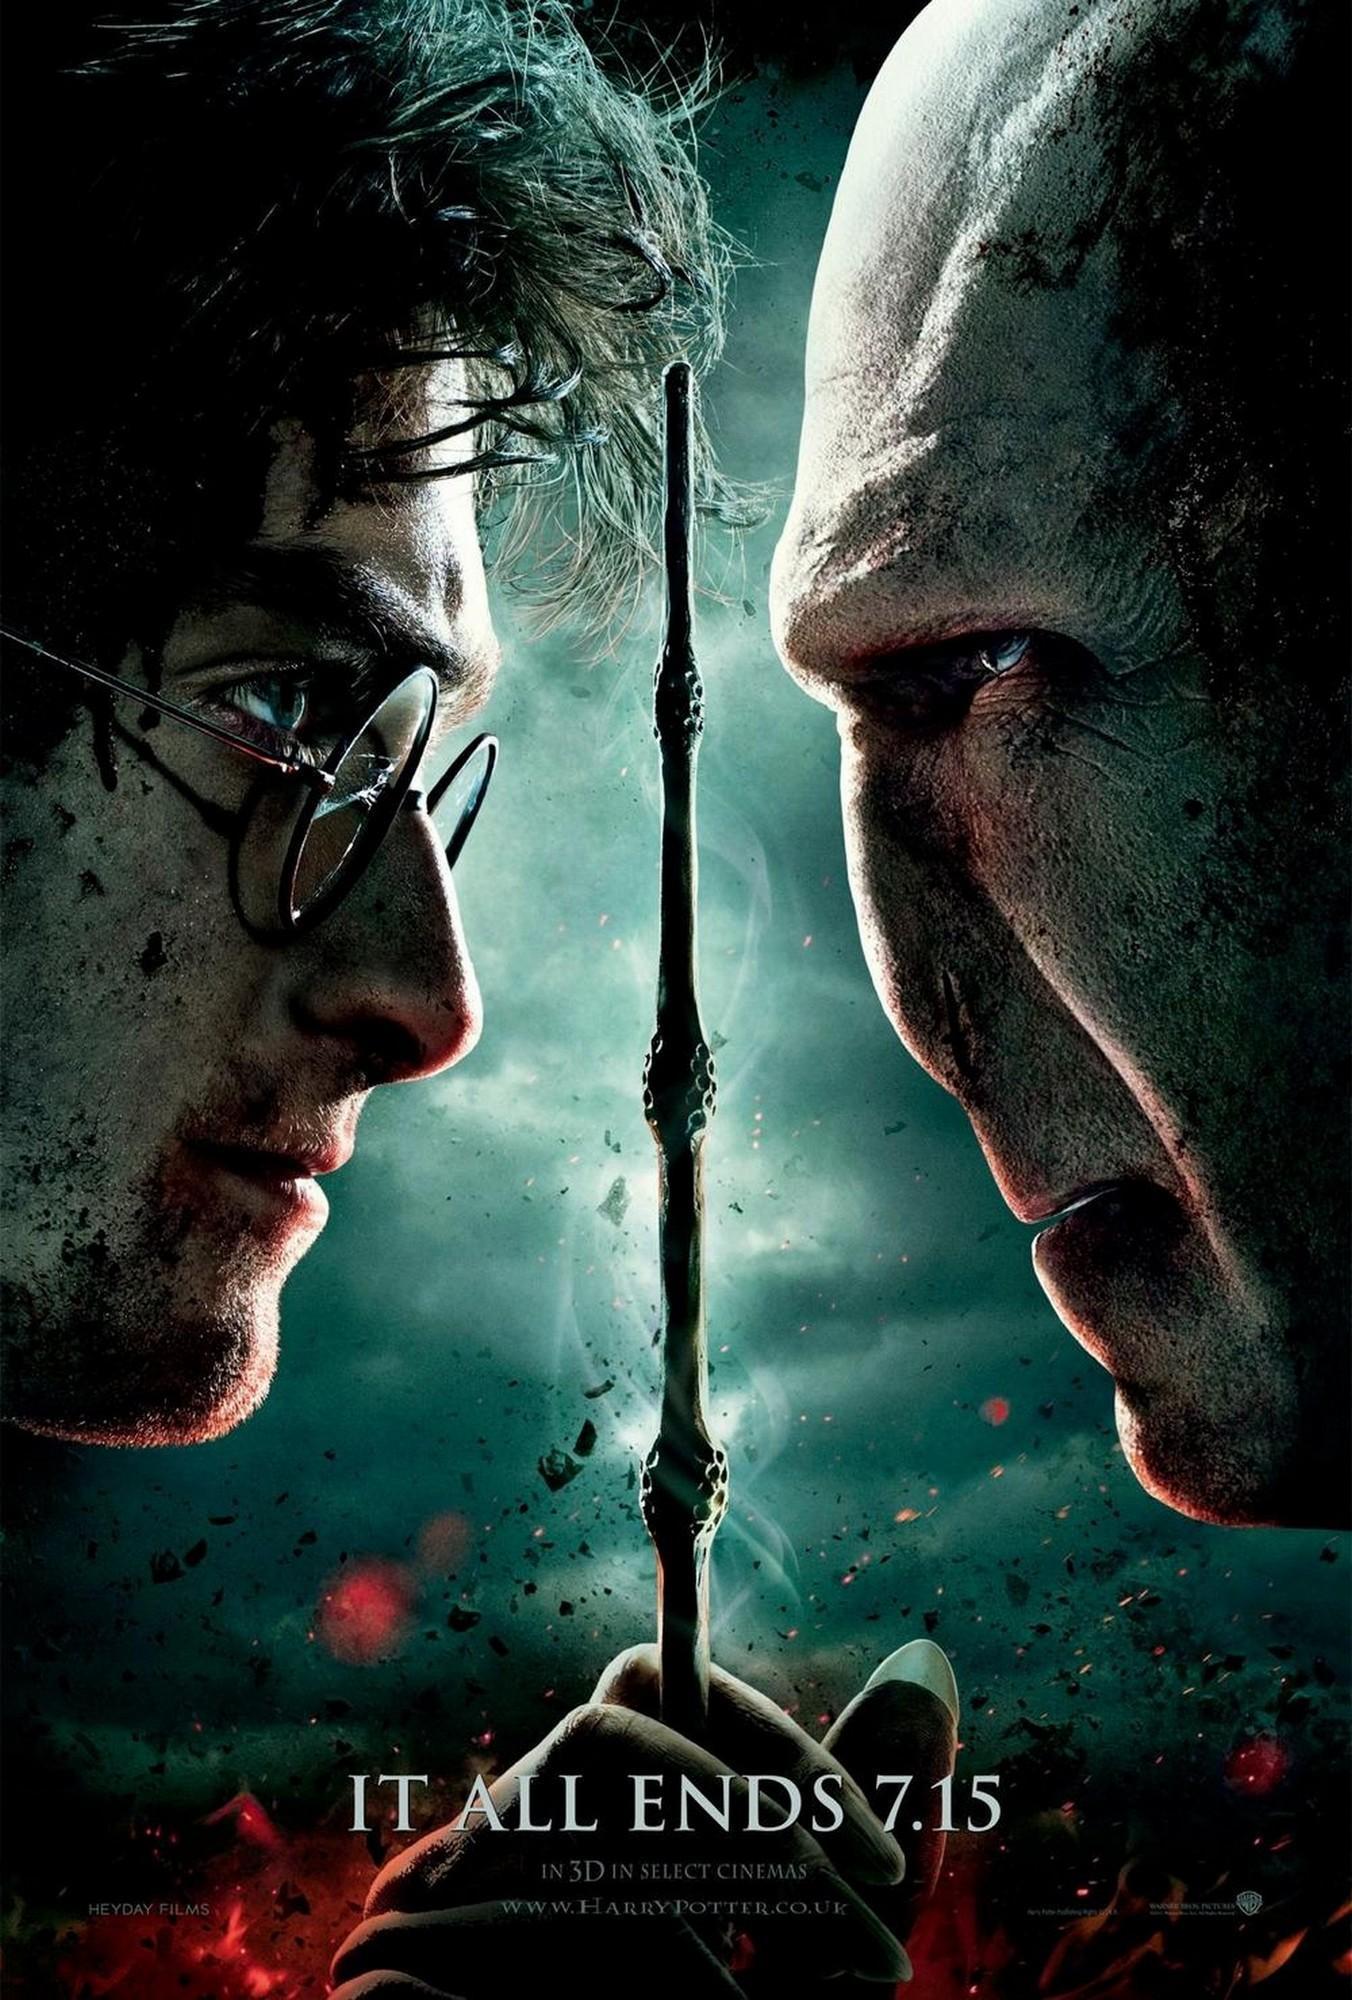 Harry Potter and the Deathly Hallows Part 2 (HQ) - Harry Potter Vs. Twilight Photo ...1352 x 2000